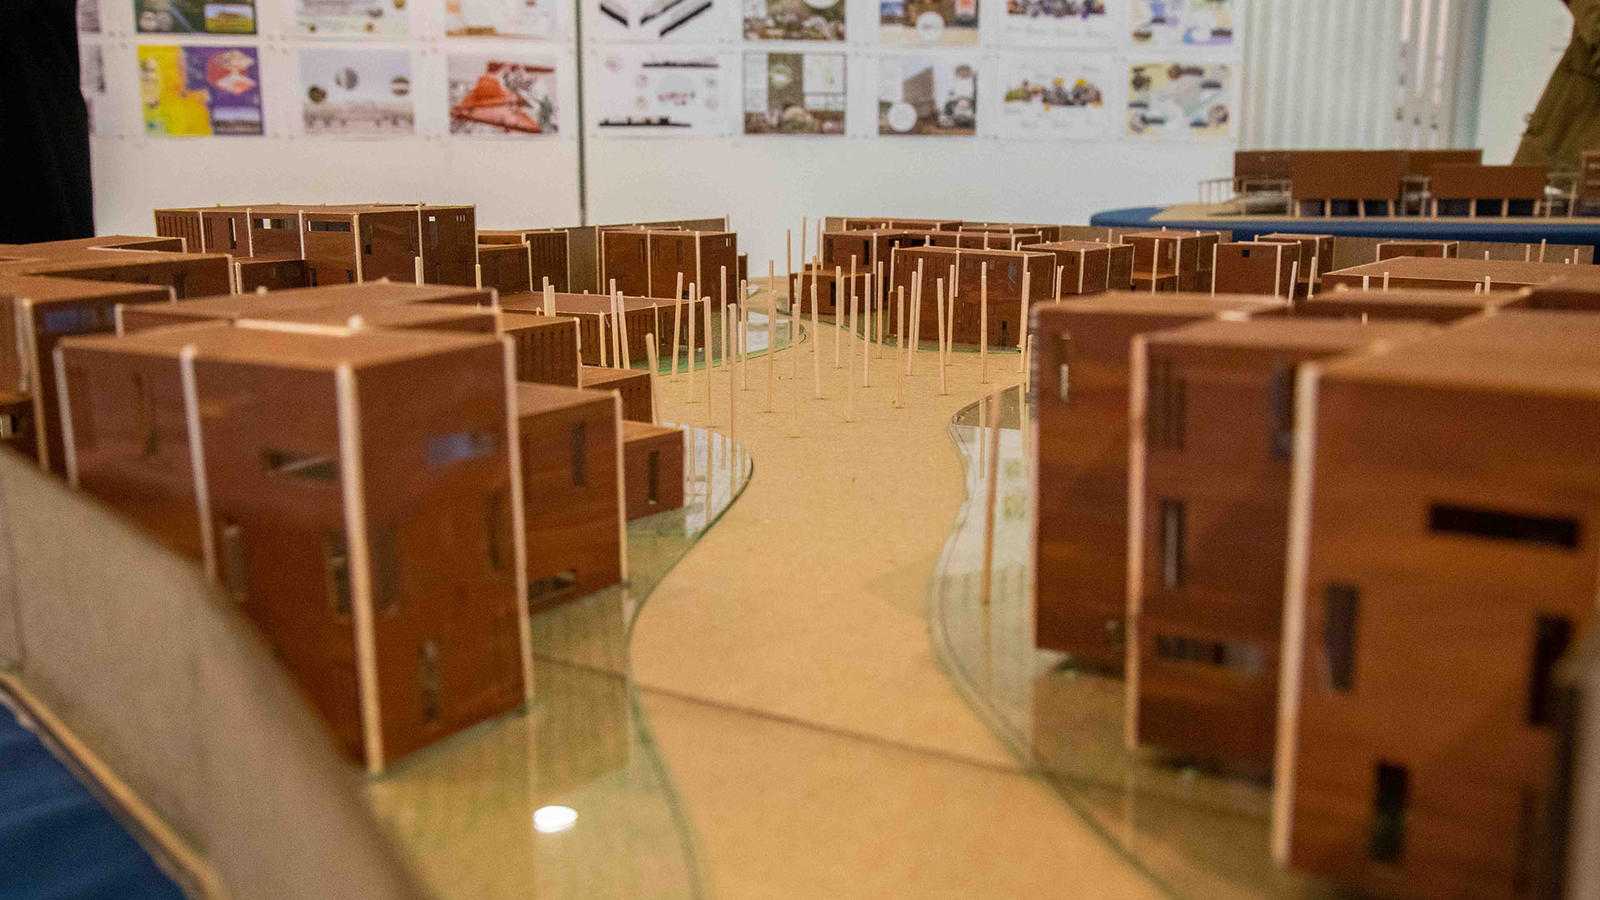 architectural models on a table in a classroom